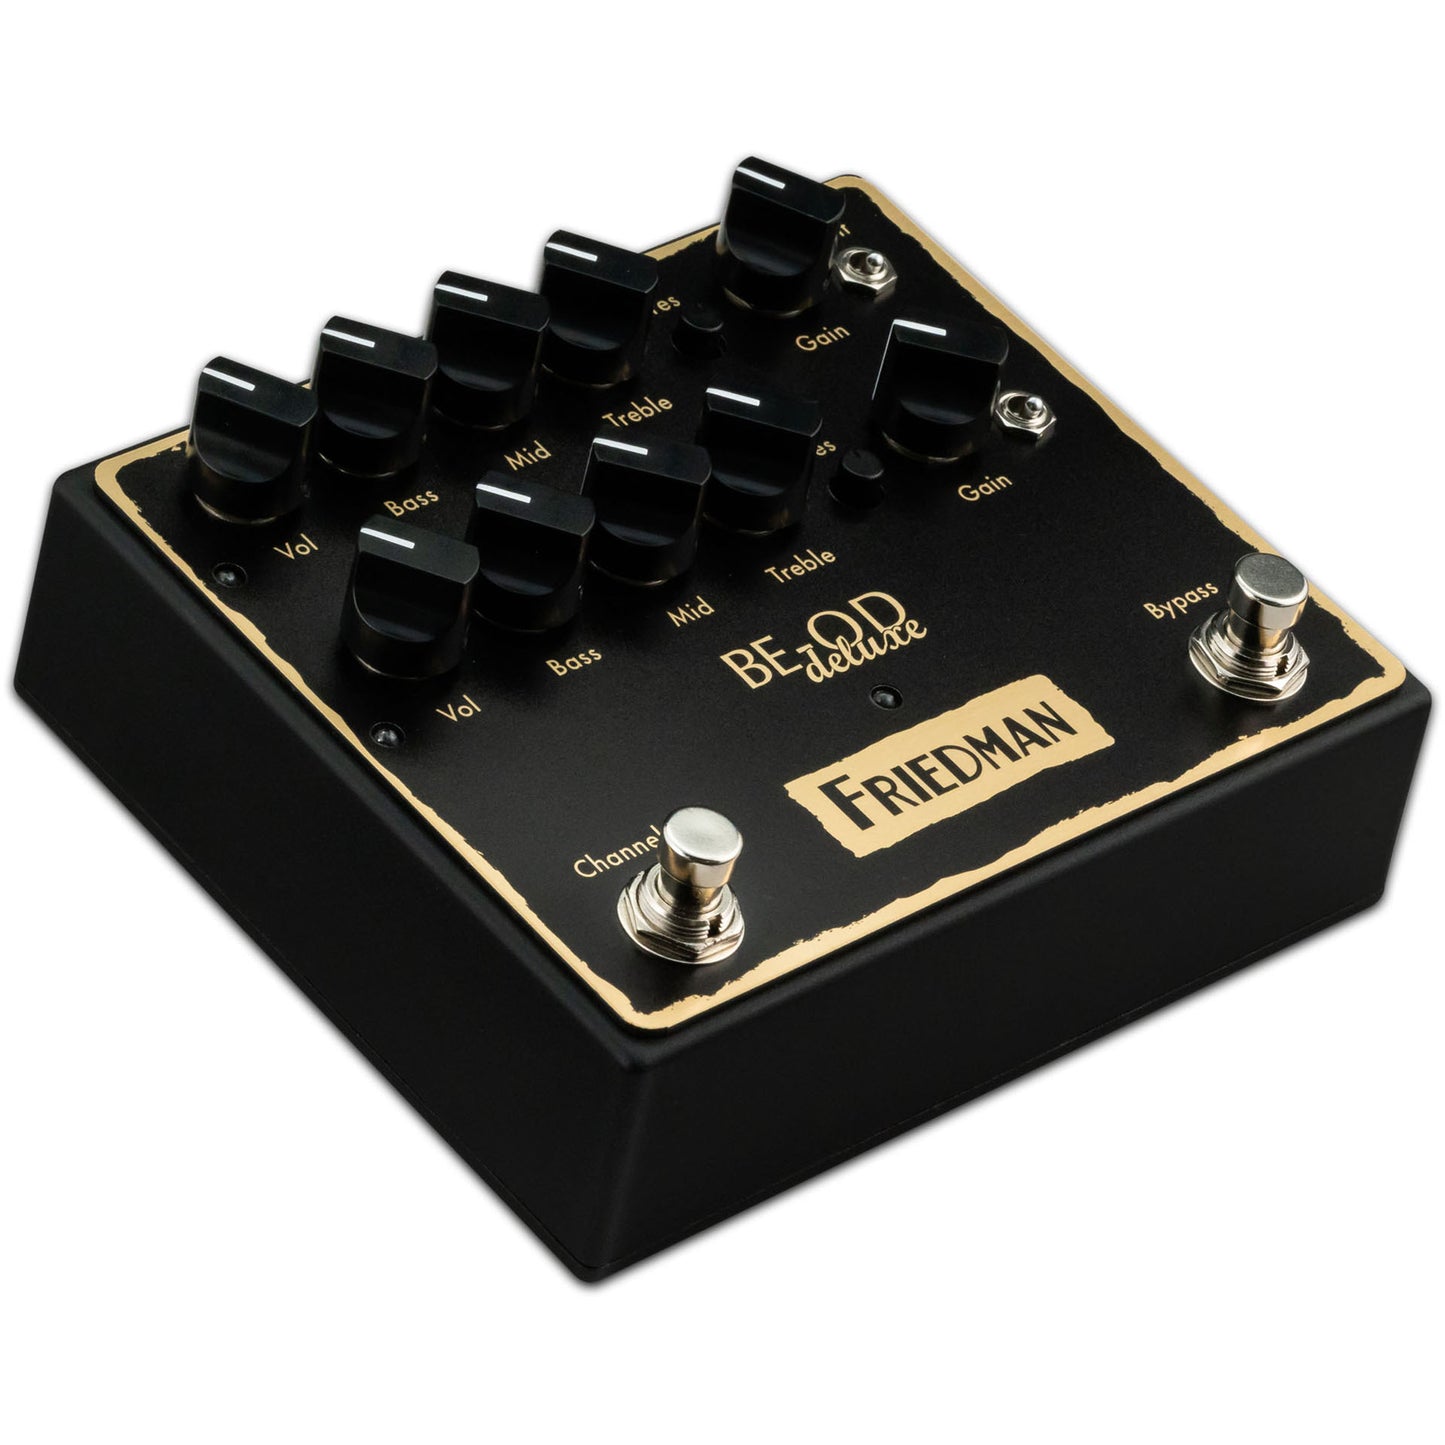 Friedman BE-OD Deluxe Dual Overdrive